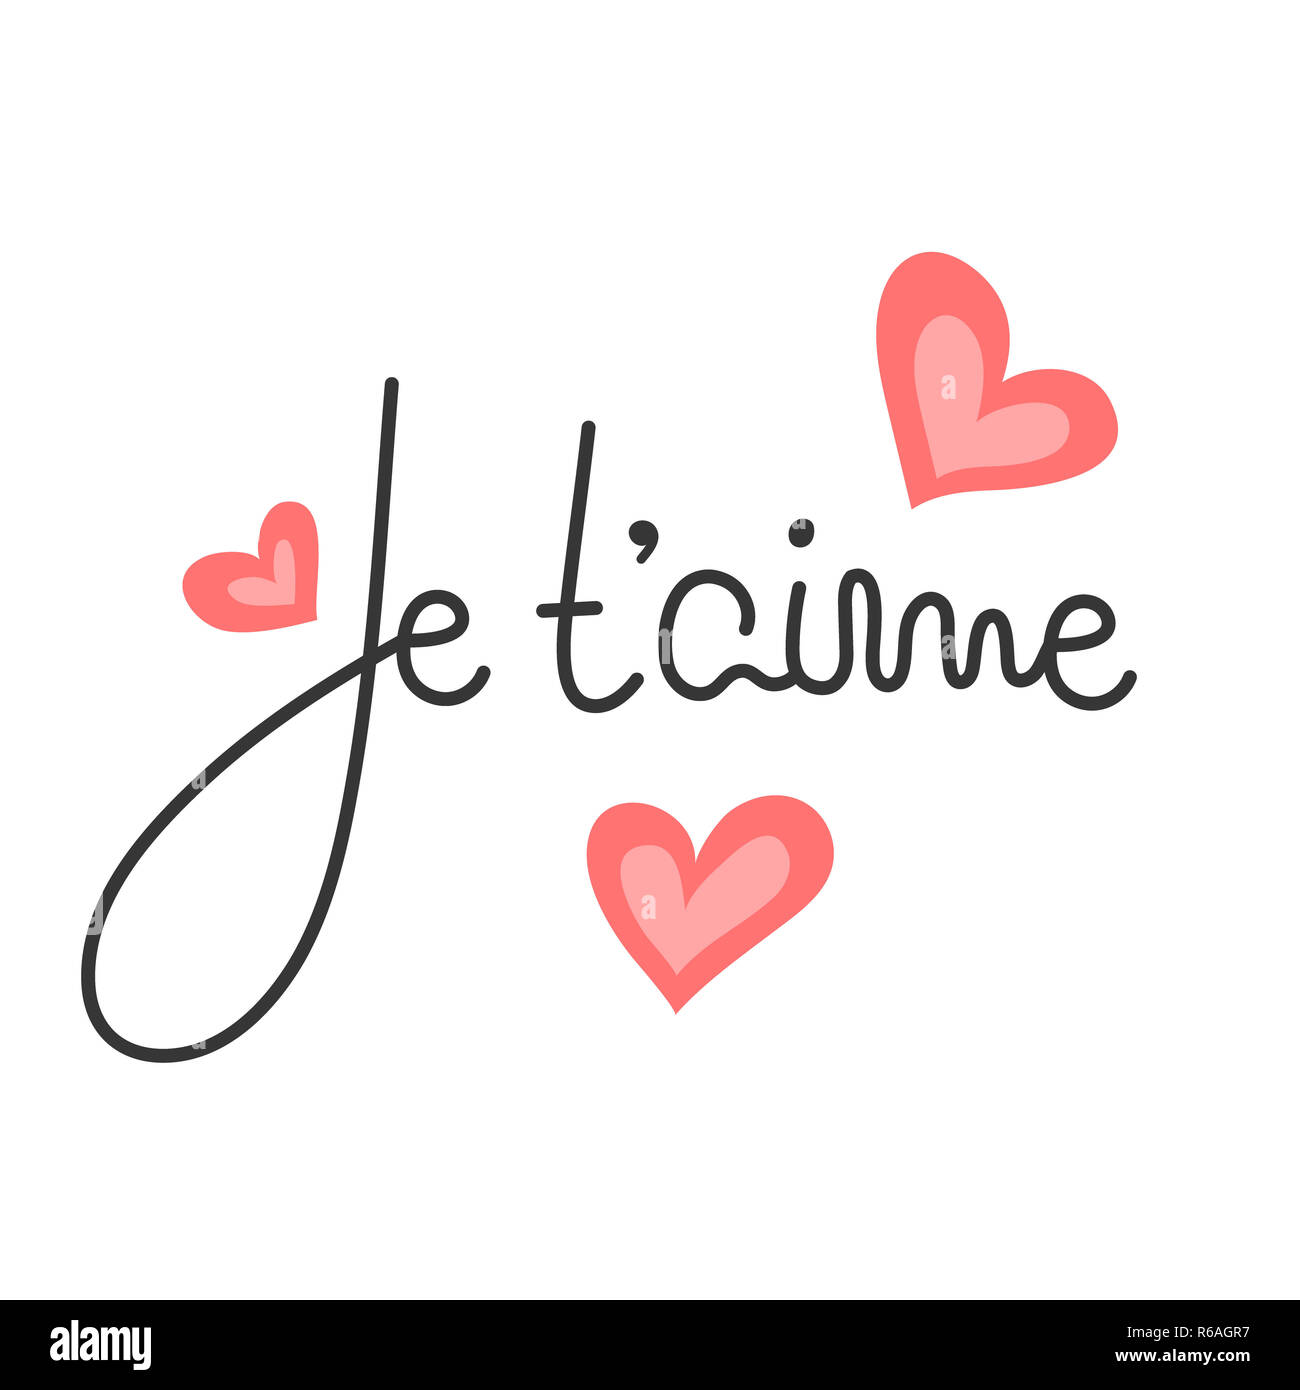 Je t'aime. French lettering. Handwritten romantic quote. Happy Valentine's day. Holiday in February. Calligraphy Stock Photo